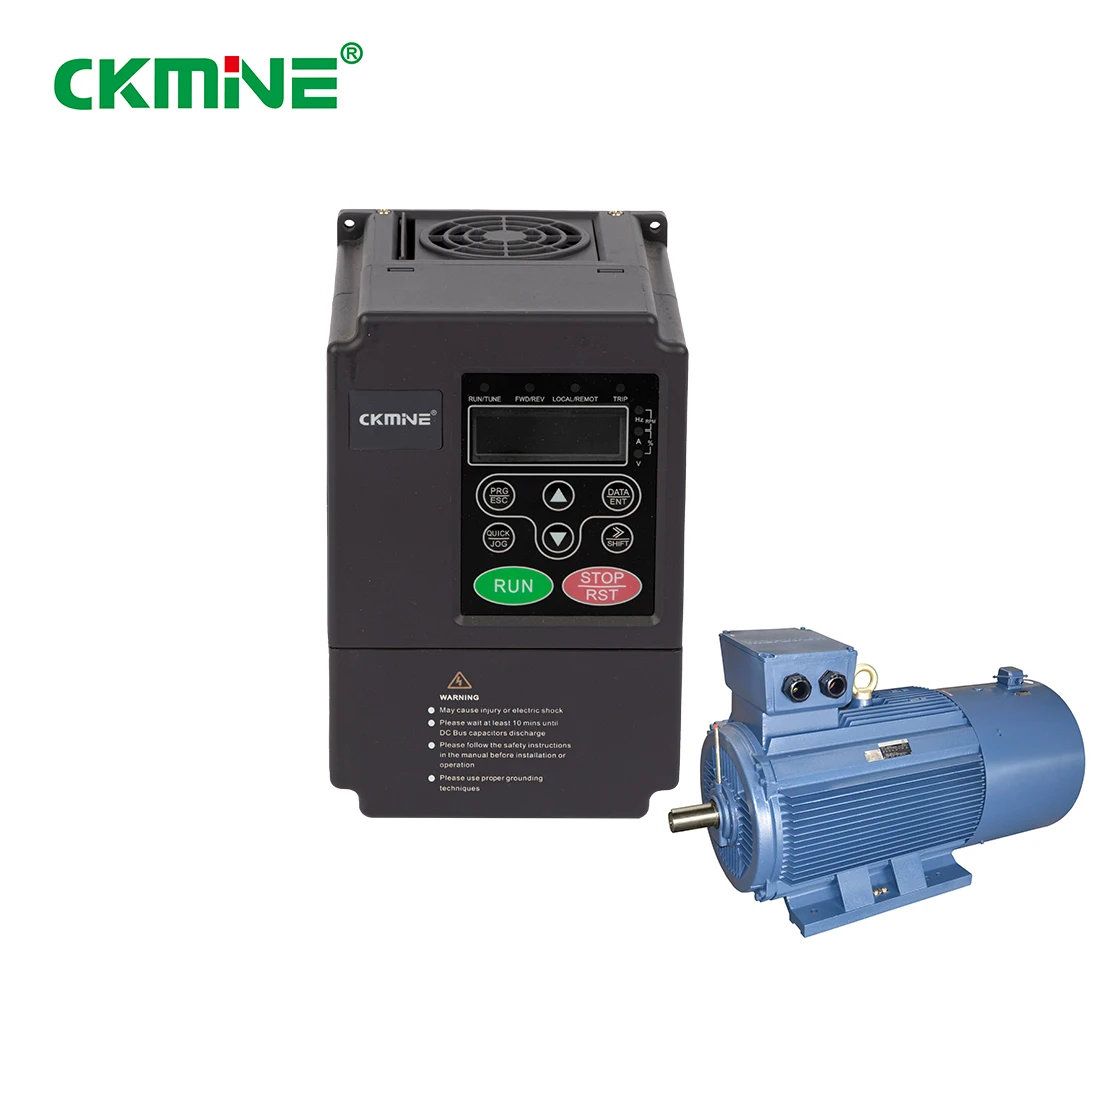 CKMINE KM7000-004G-2 5HP AC Motor Drive Speed Controller 4kW 3.7kW 3 Phase 220V Variable Frequency Inverter for Factory Machine